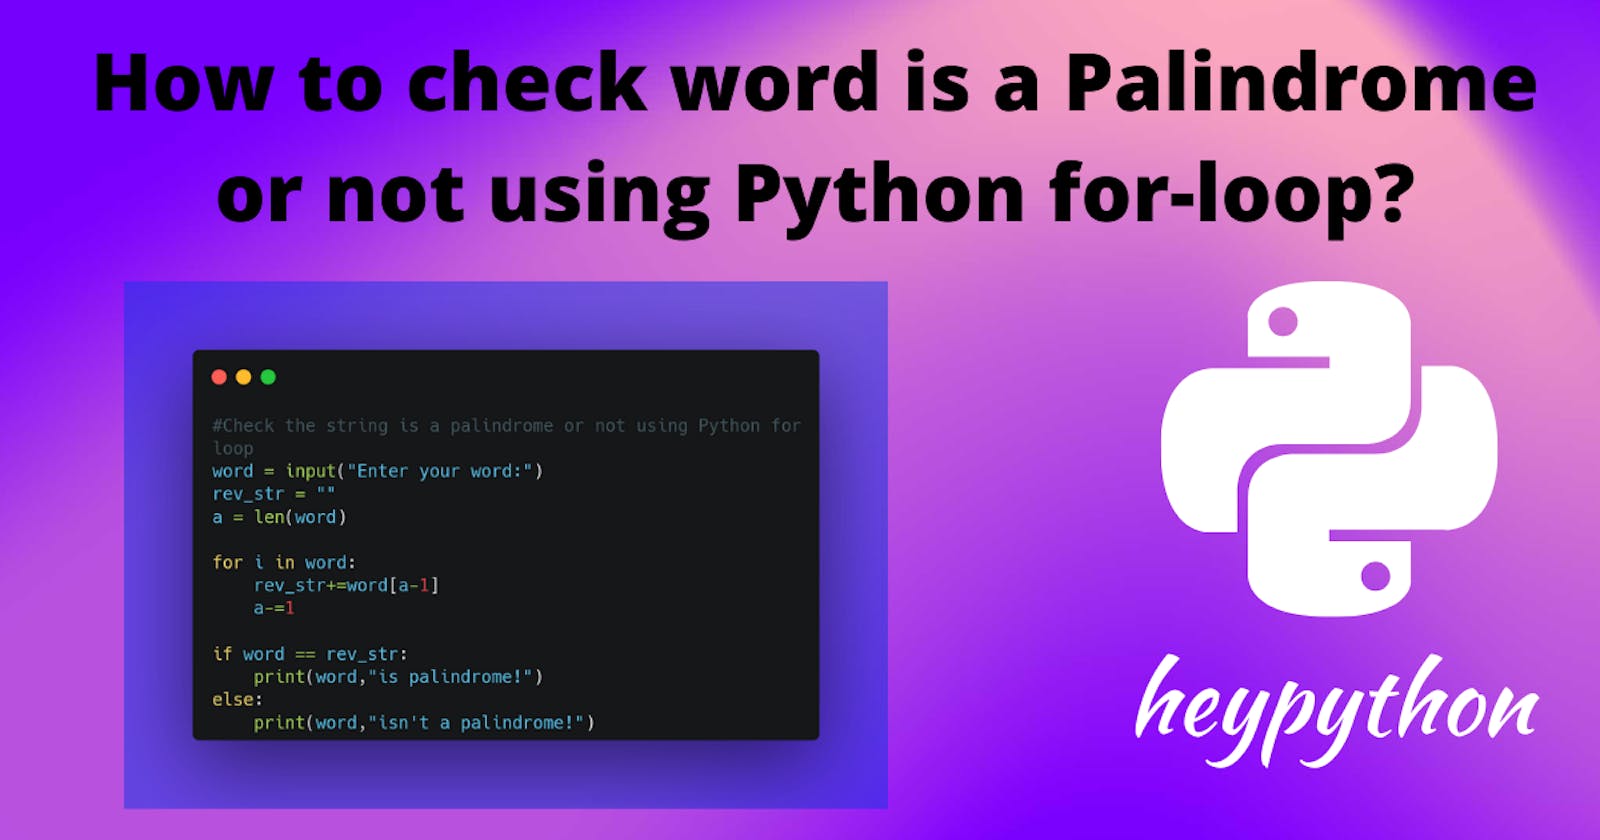 How to check word is a palindrome or not using Python for loop?